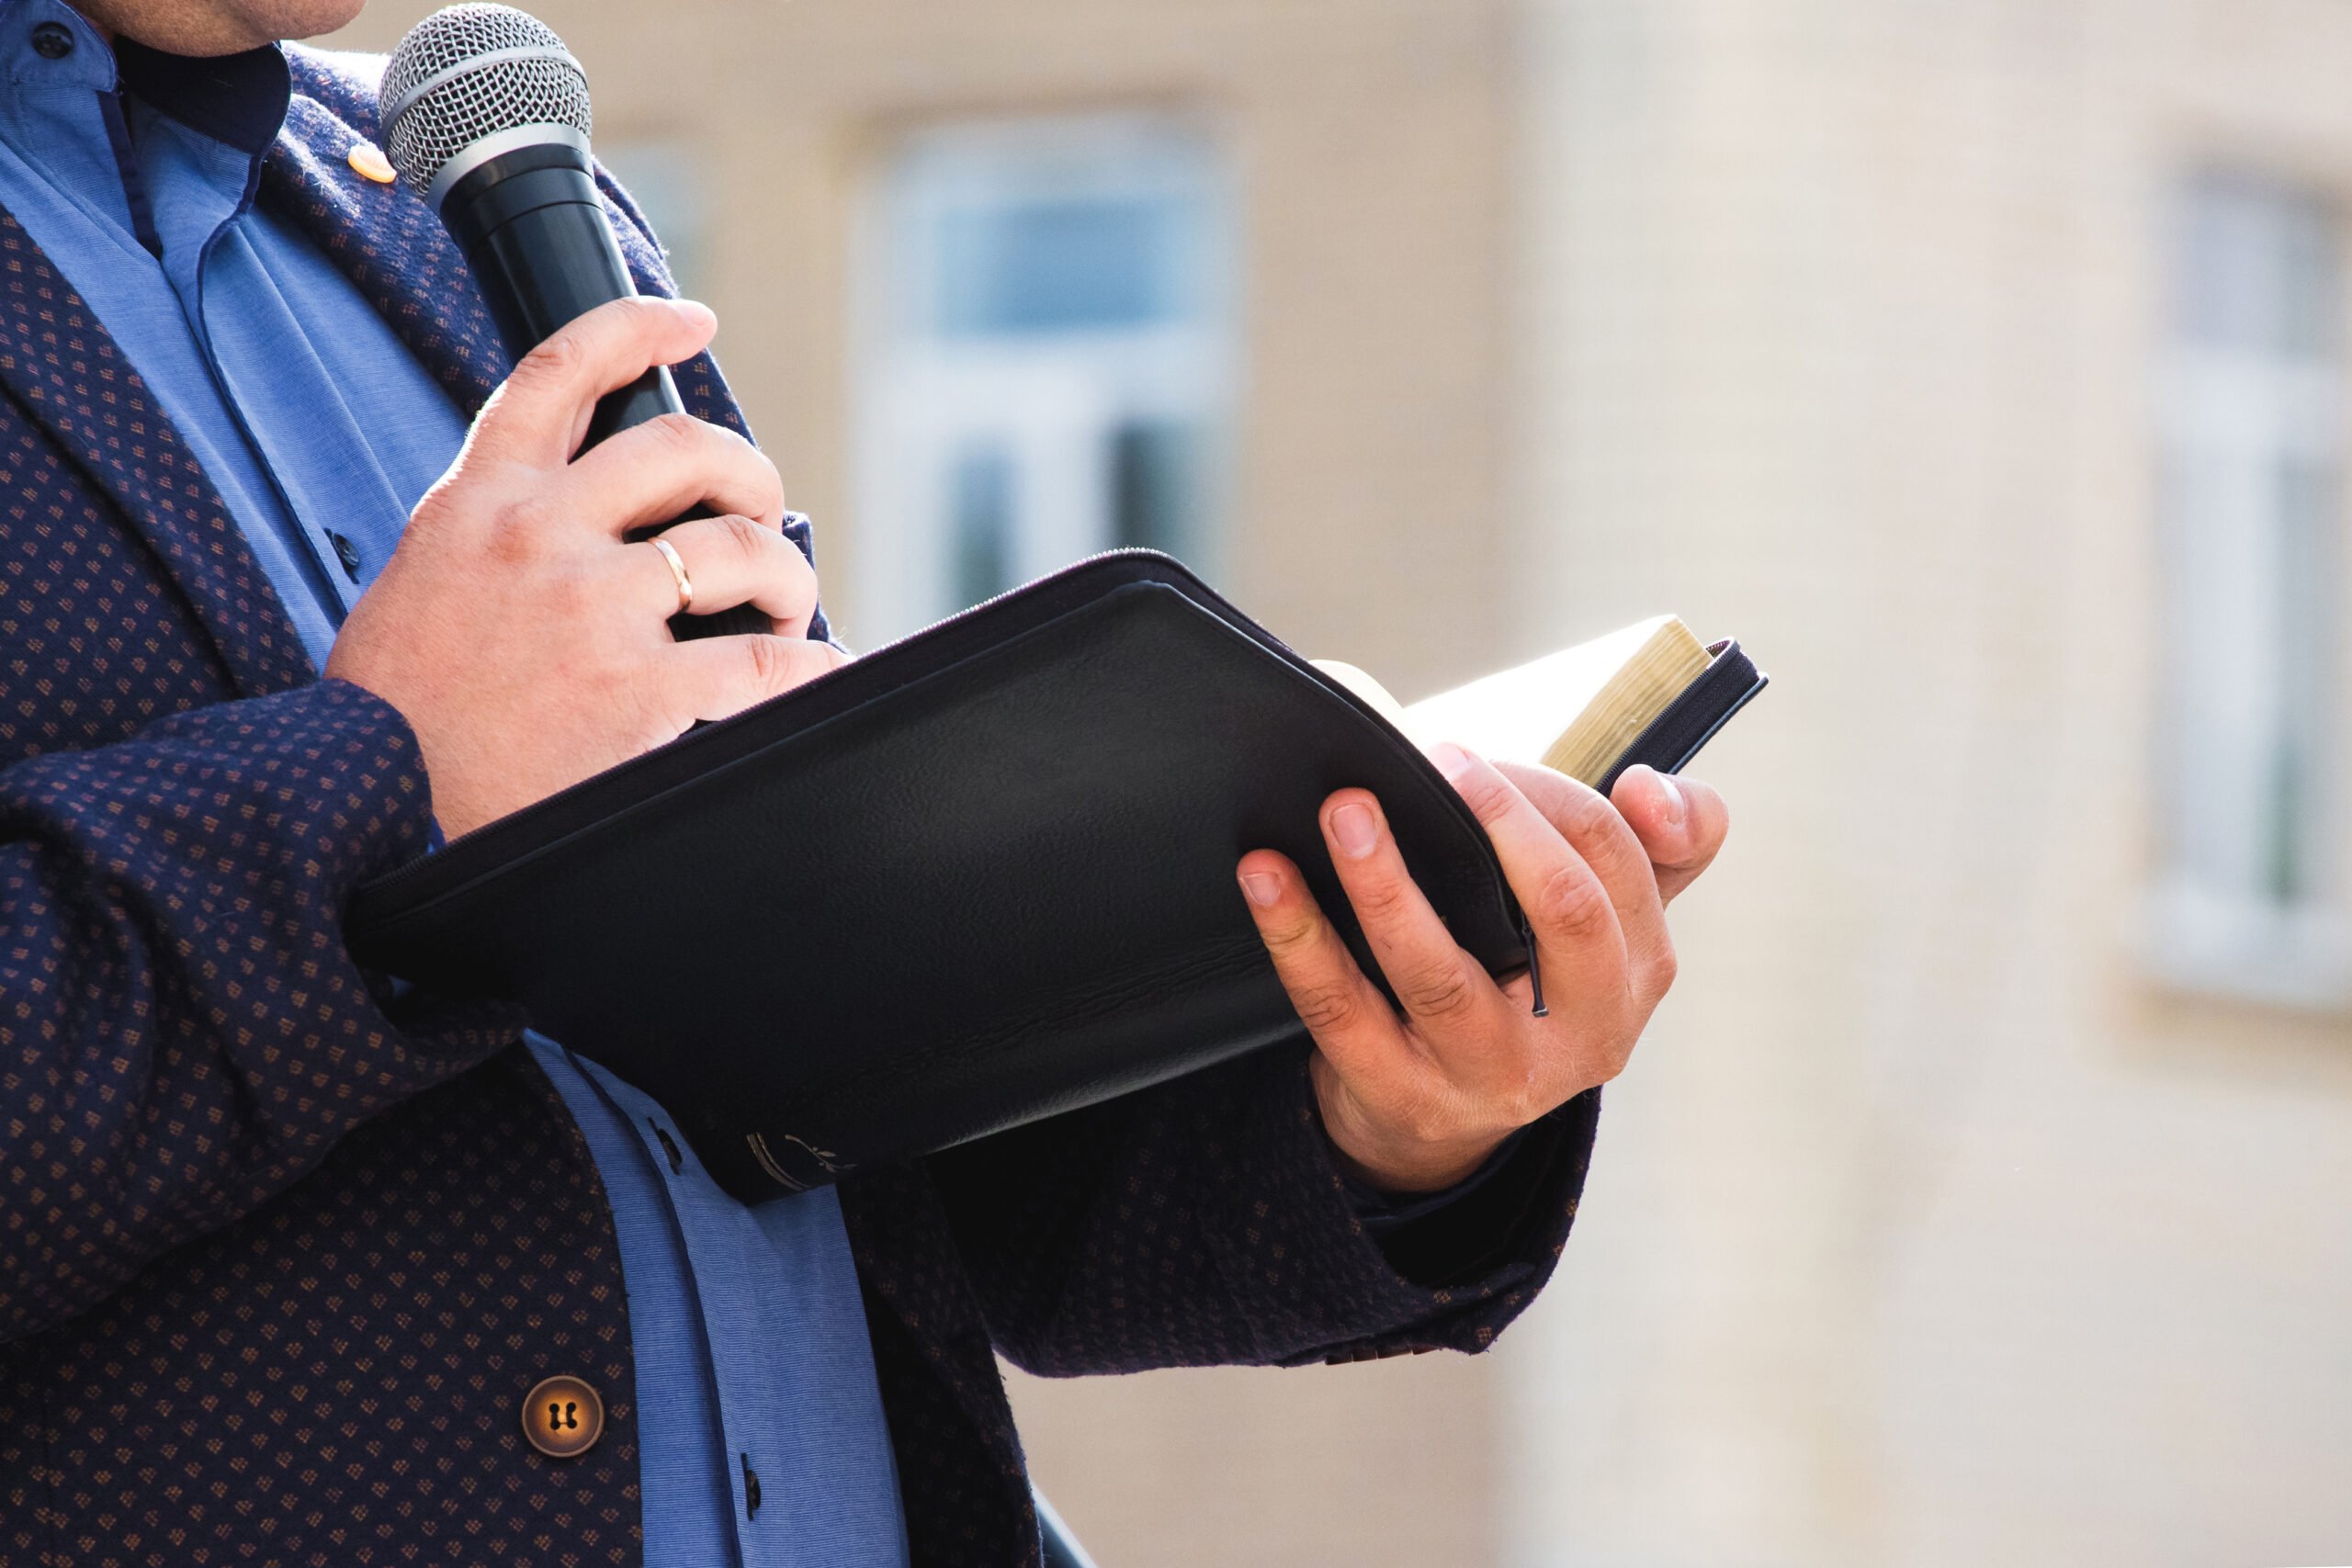 A preacher with a microphone in his hand holds a Bible and reads a passage from it